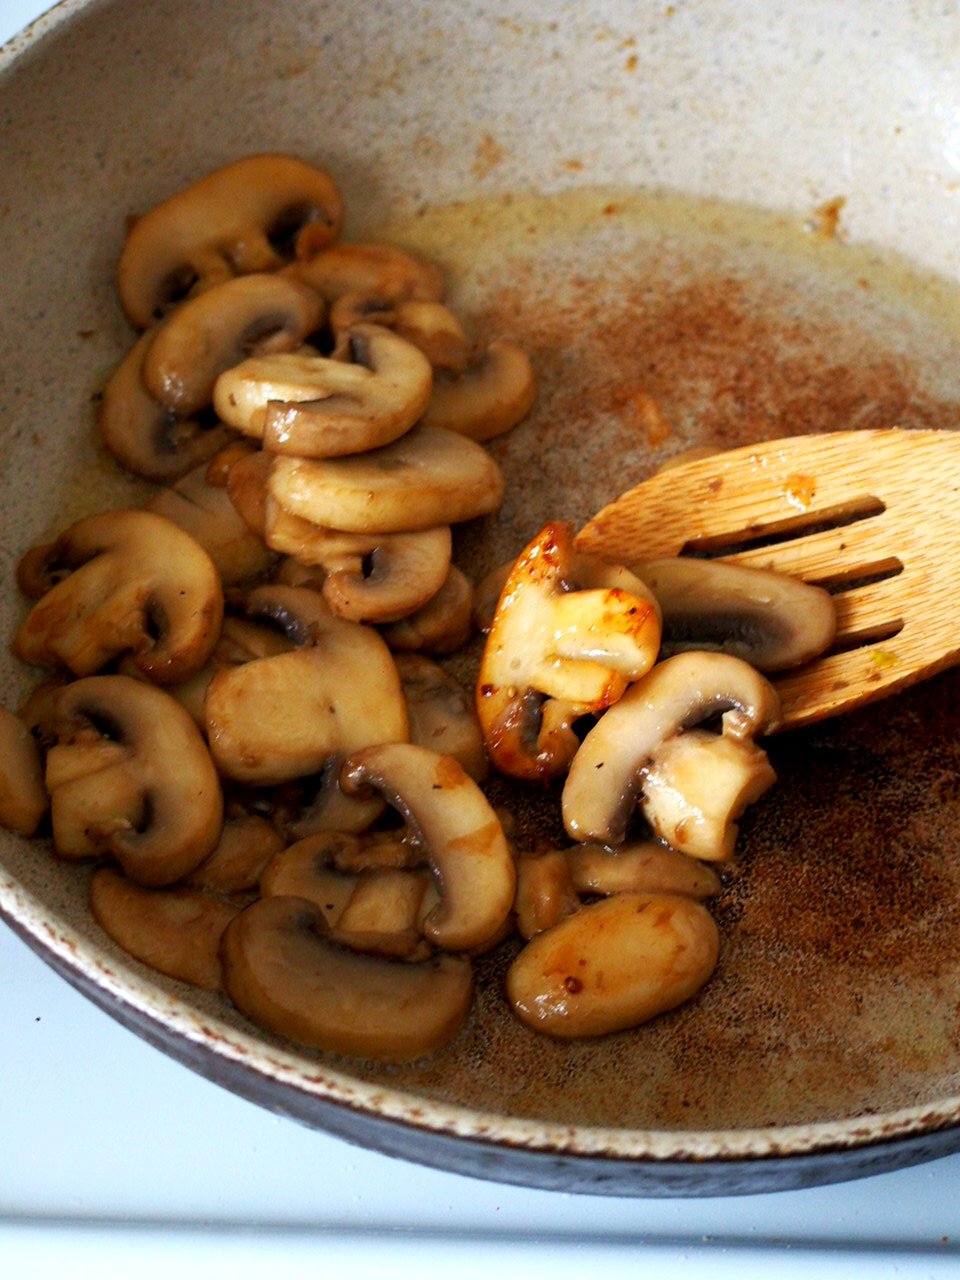 Browning the mushrooms in a pan.